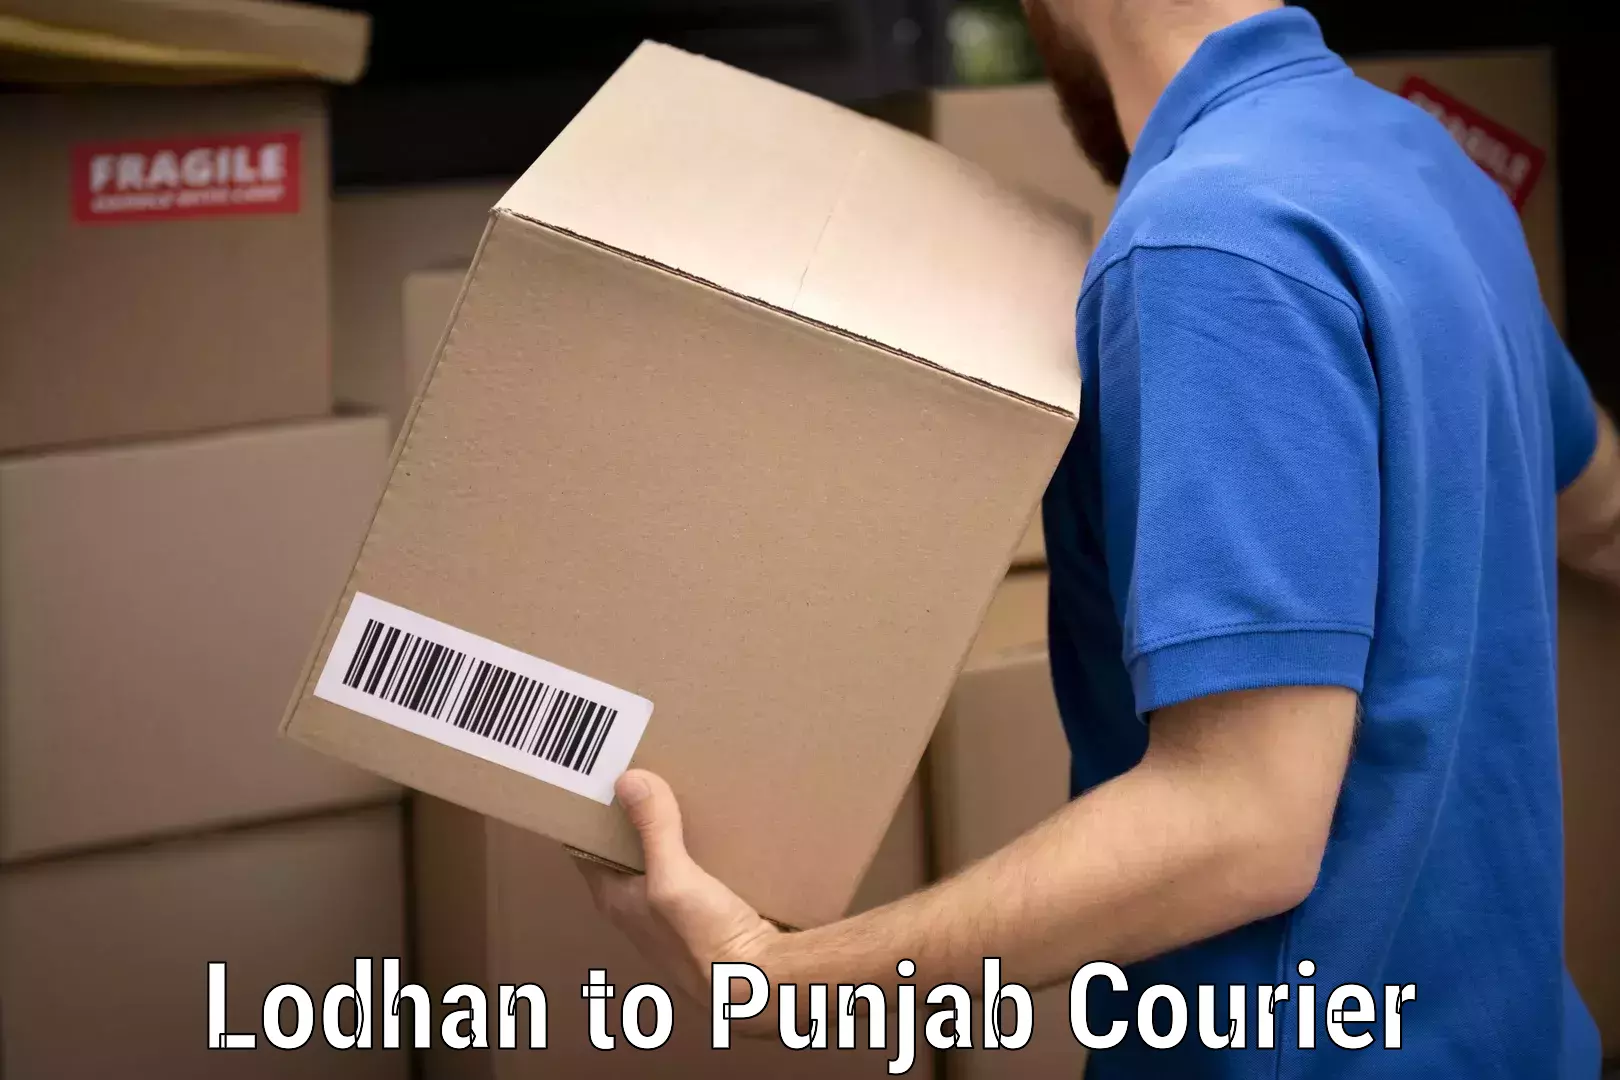 Furniture delivery service Lodhan to Punjab